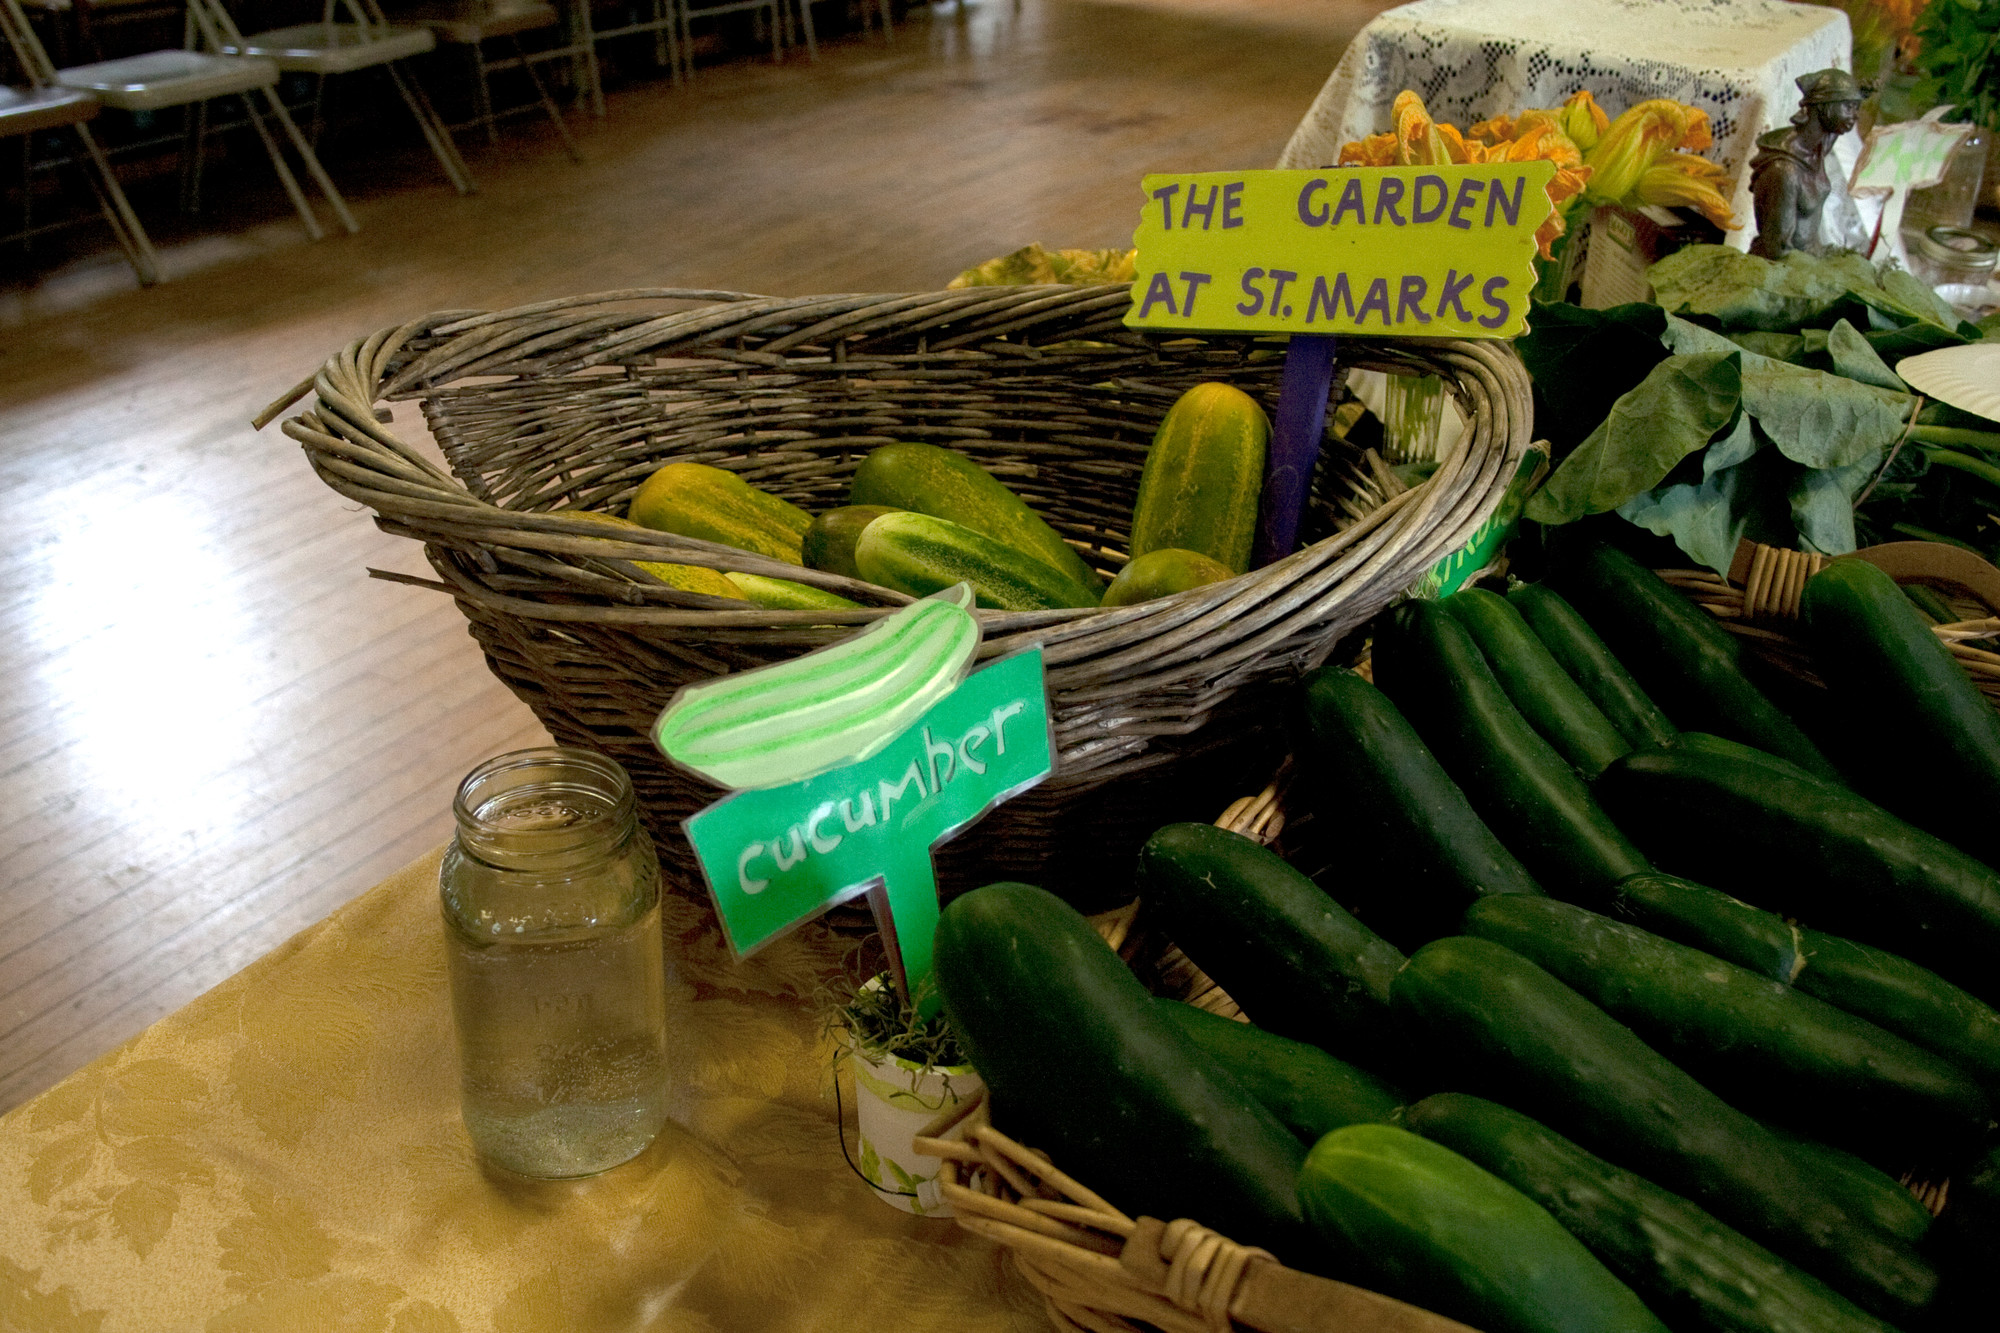 Cucumbers are among the vegetables on sale this summer.